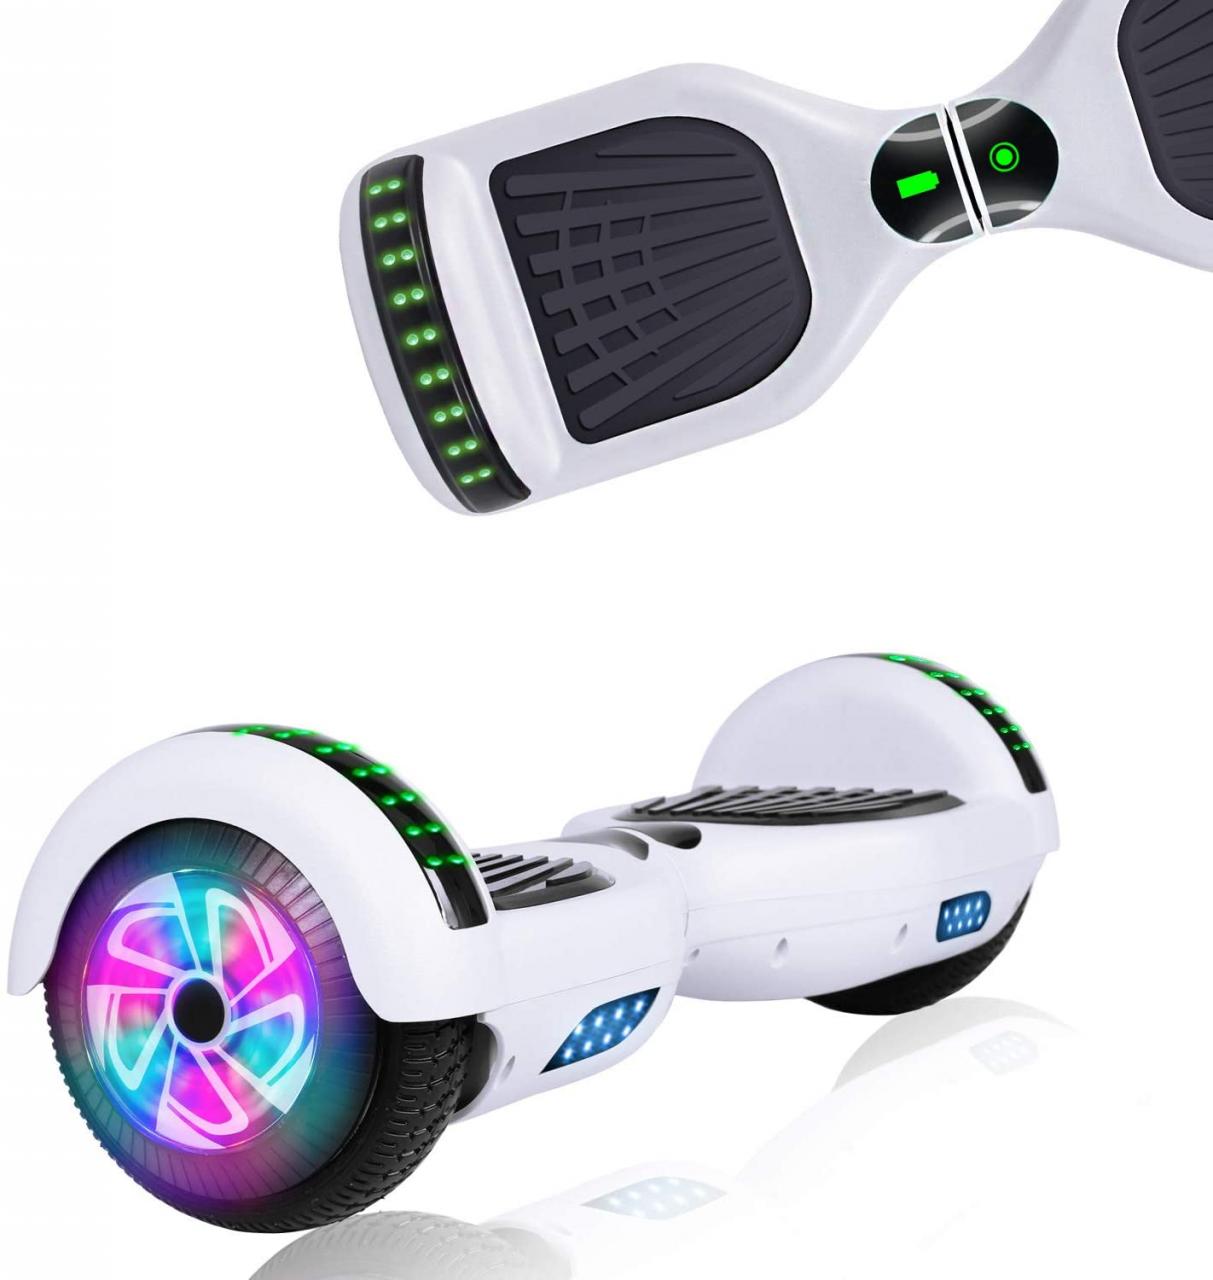 Buy UNI-SUN Hoverboard for Kids, 6.5 Two Wheel Self Balancing Hoverboards  with Bluetooth and Lights Online in Hong Kong. B07VMM18X6